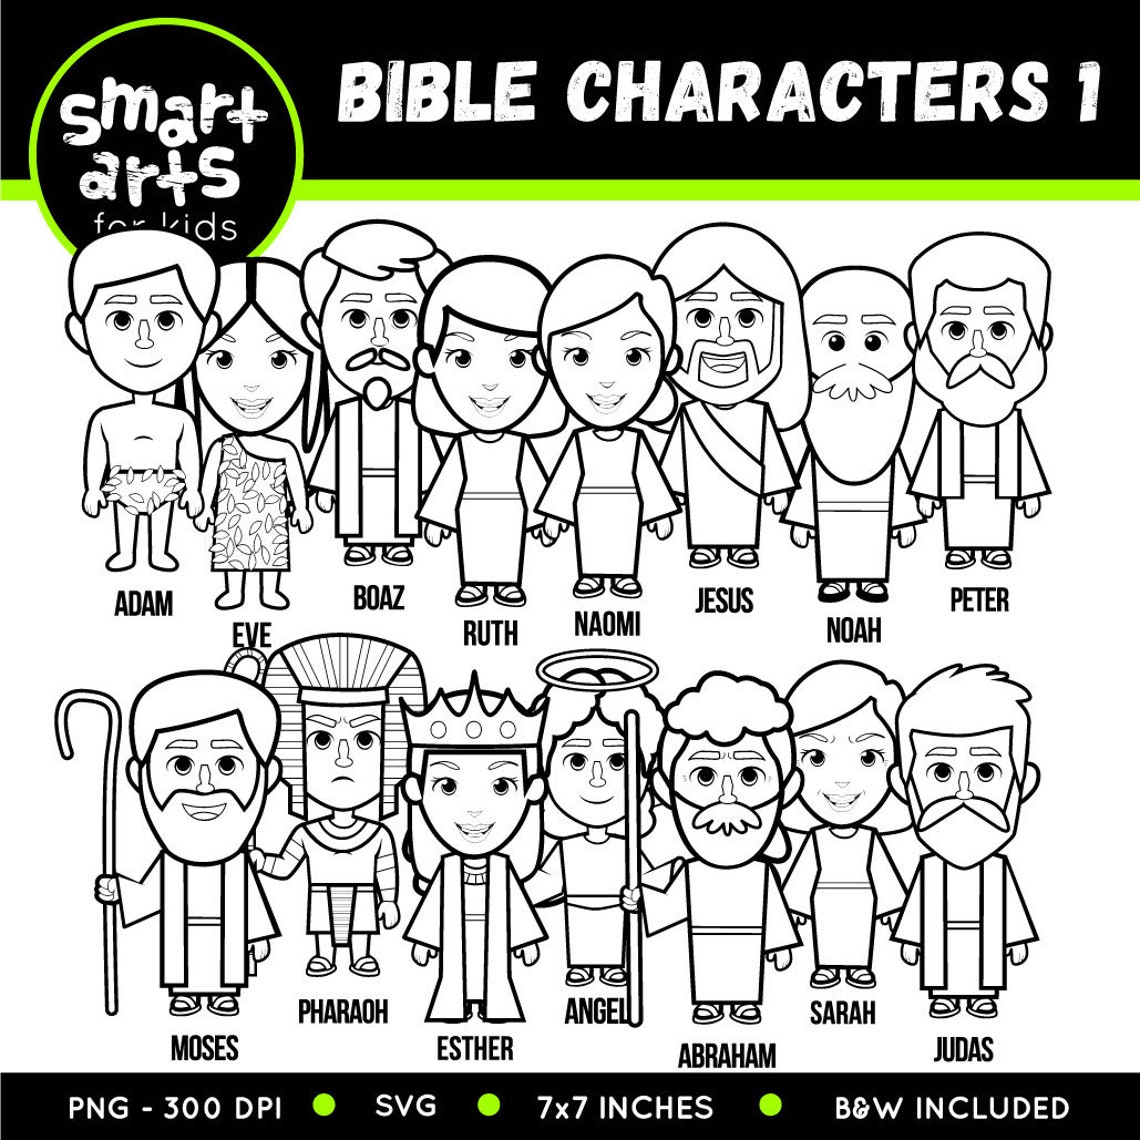 Bible Characters Clip Art 1 bible based bible characters | Etsy